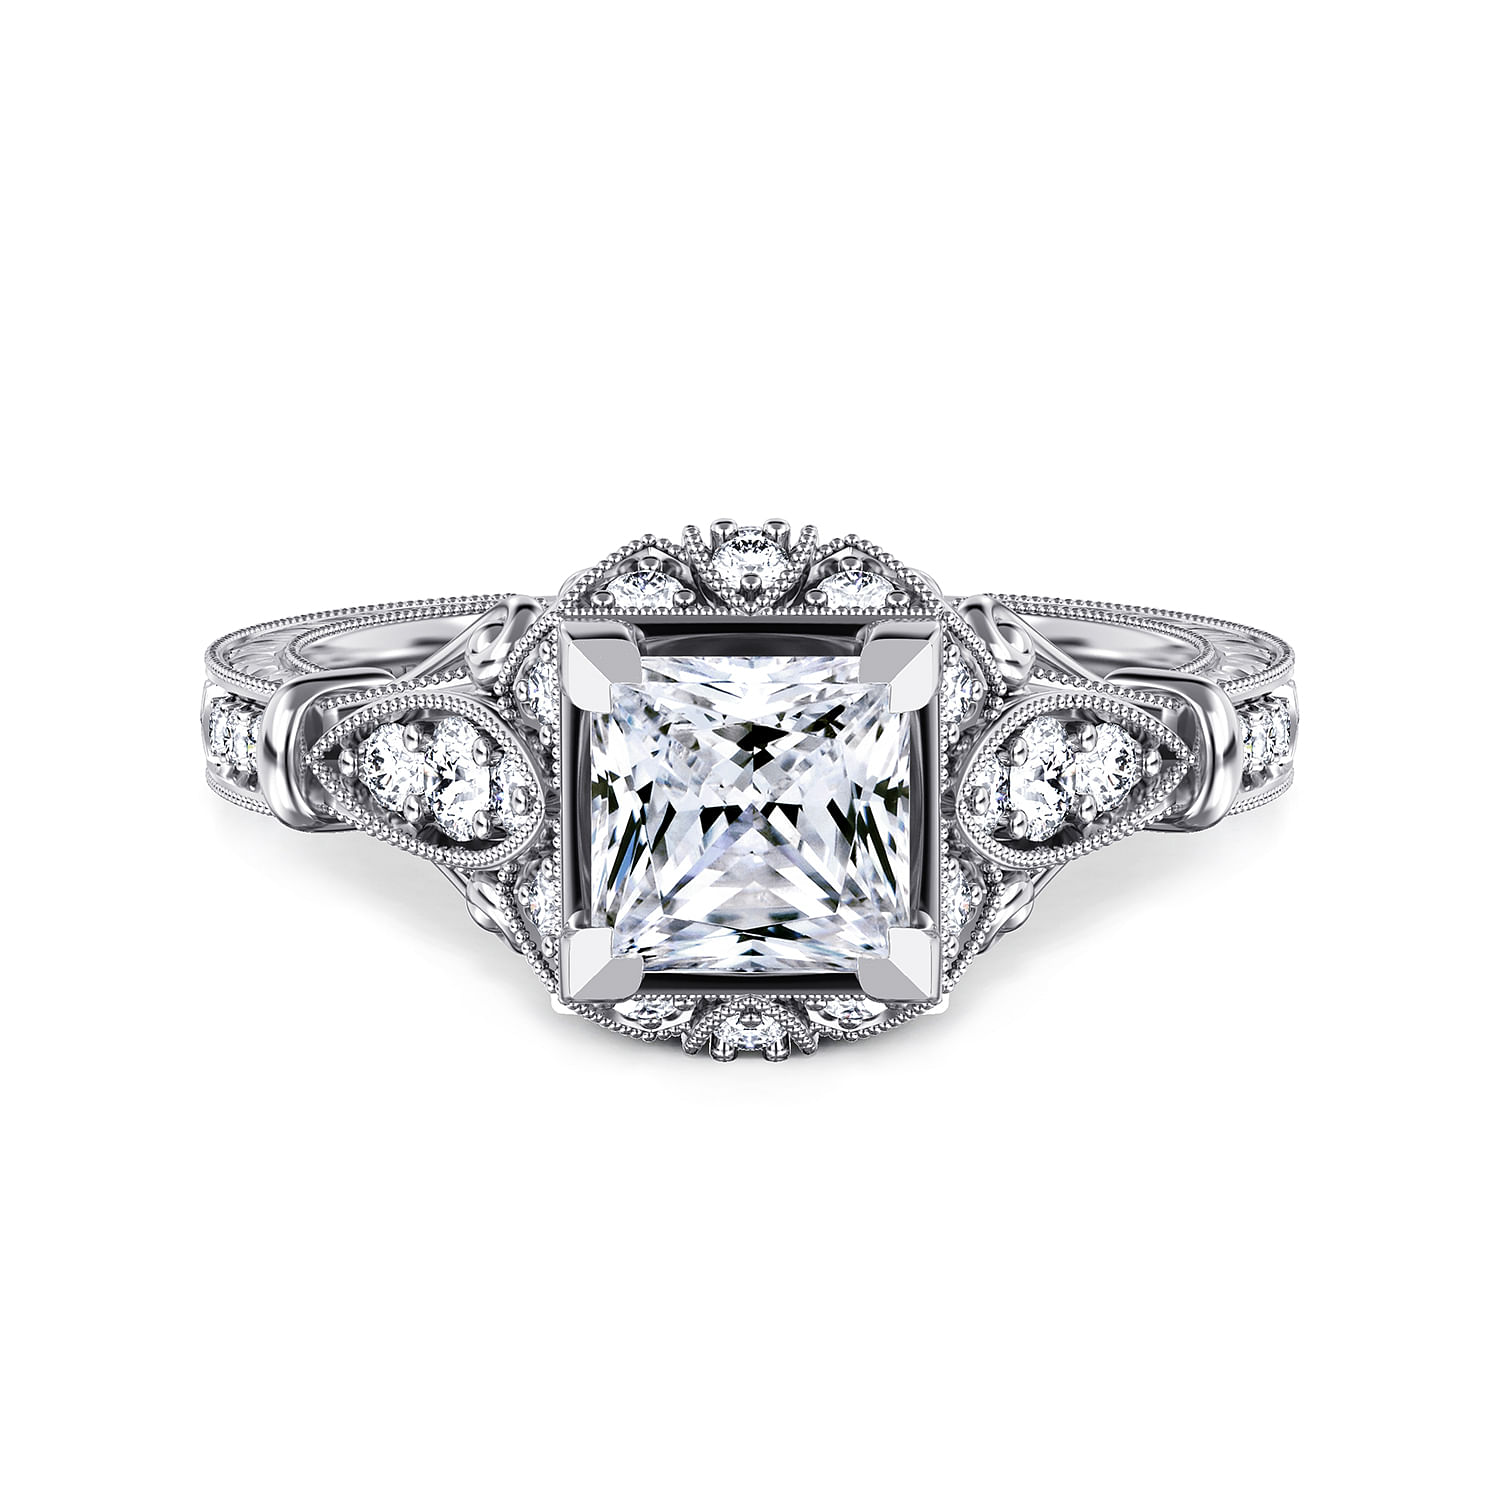 Montgomery - Unique 14K White Gold Vintage Inspired Princess Cut Halo Diamond Engagement Ring